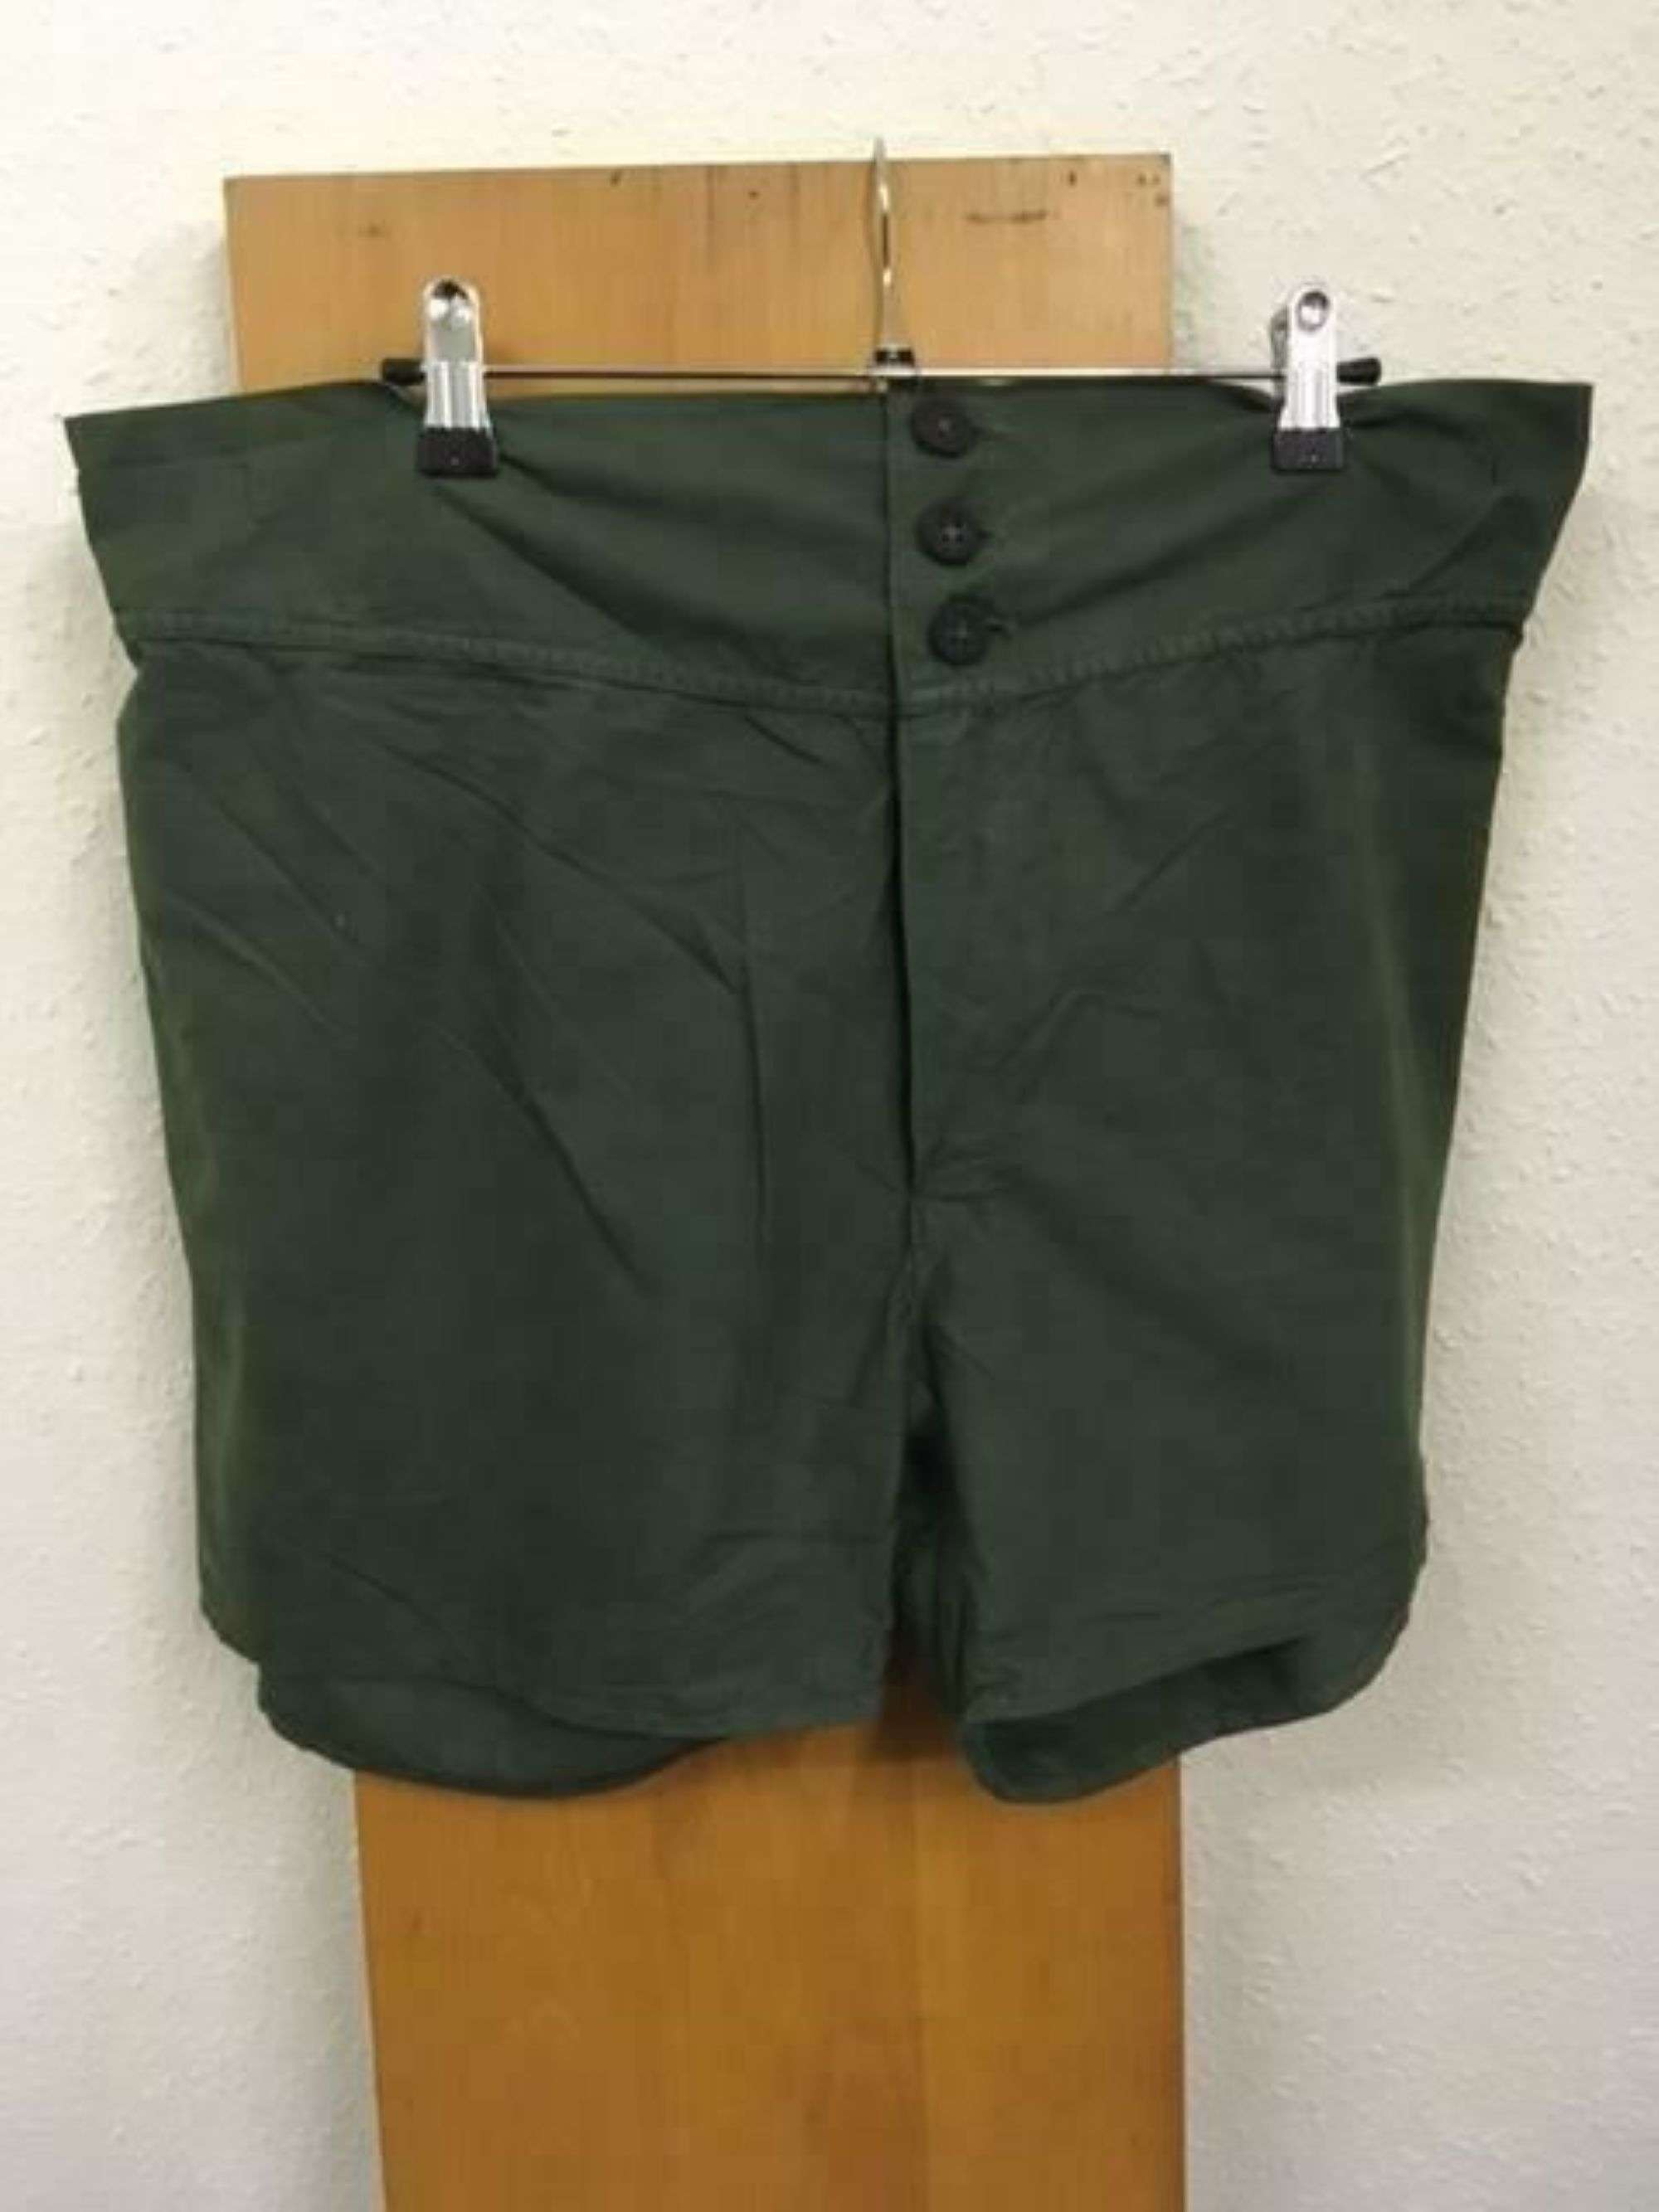 UNDERPANTS JUNGLE GREEN ( TROPICAL ) Dated 1954